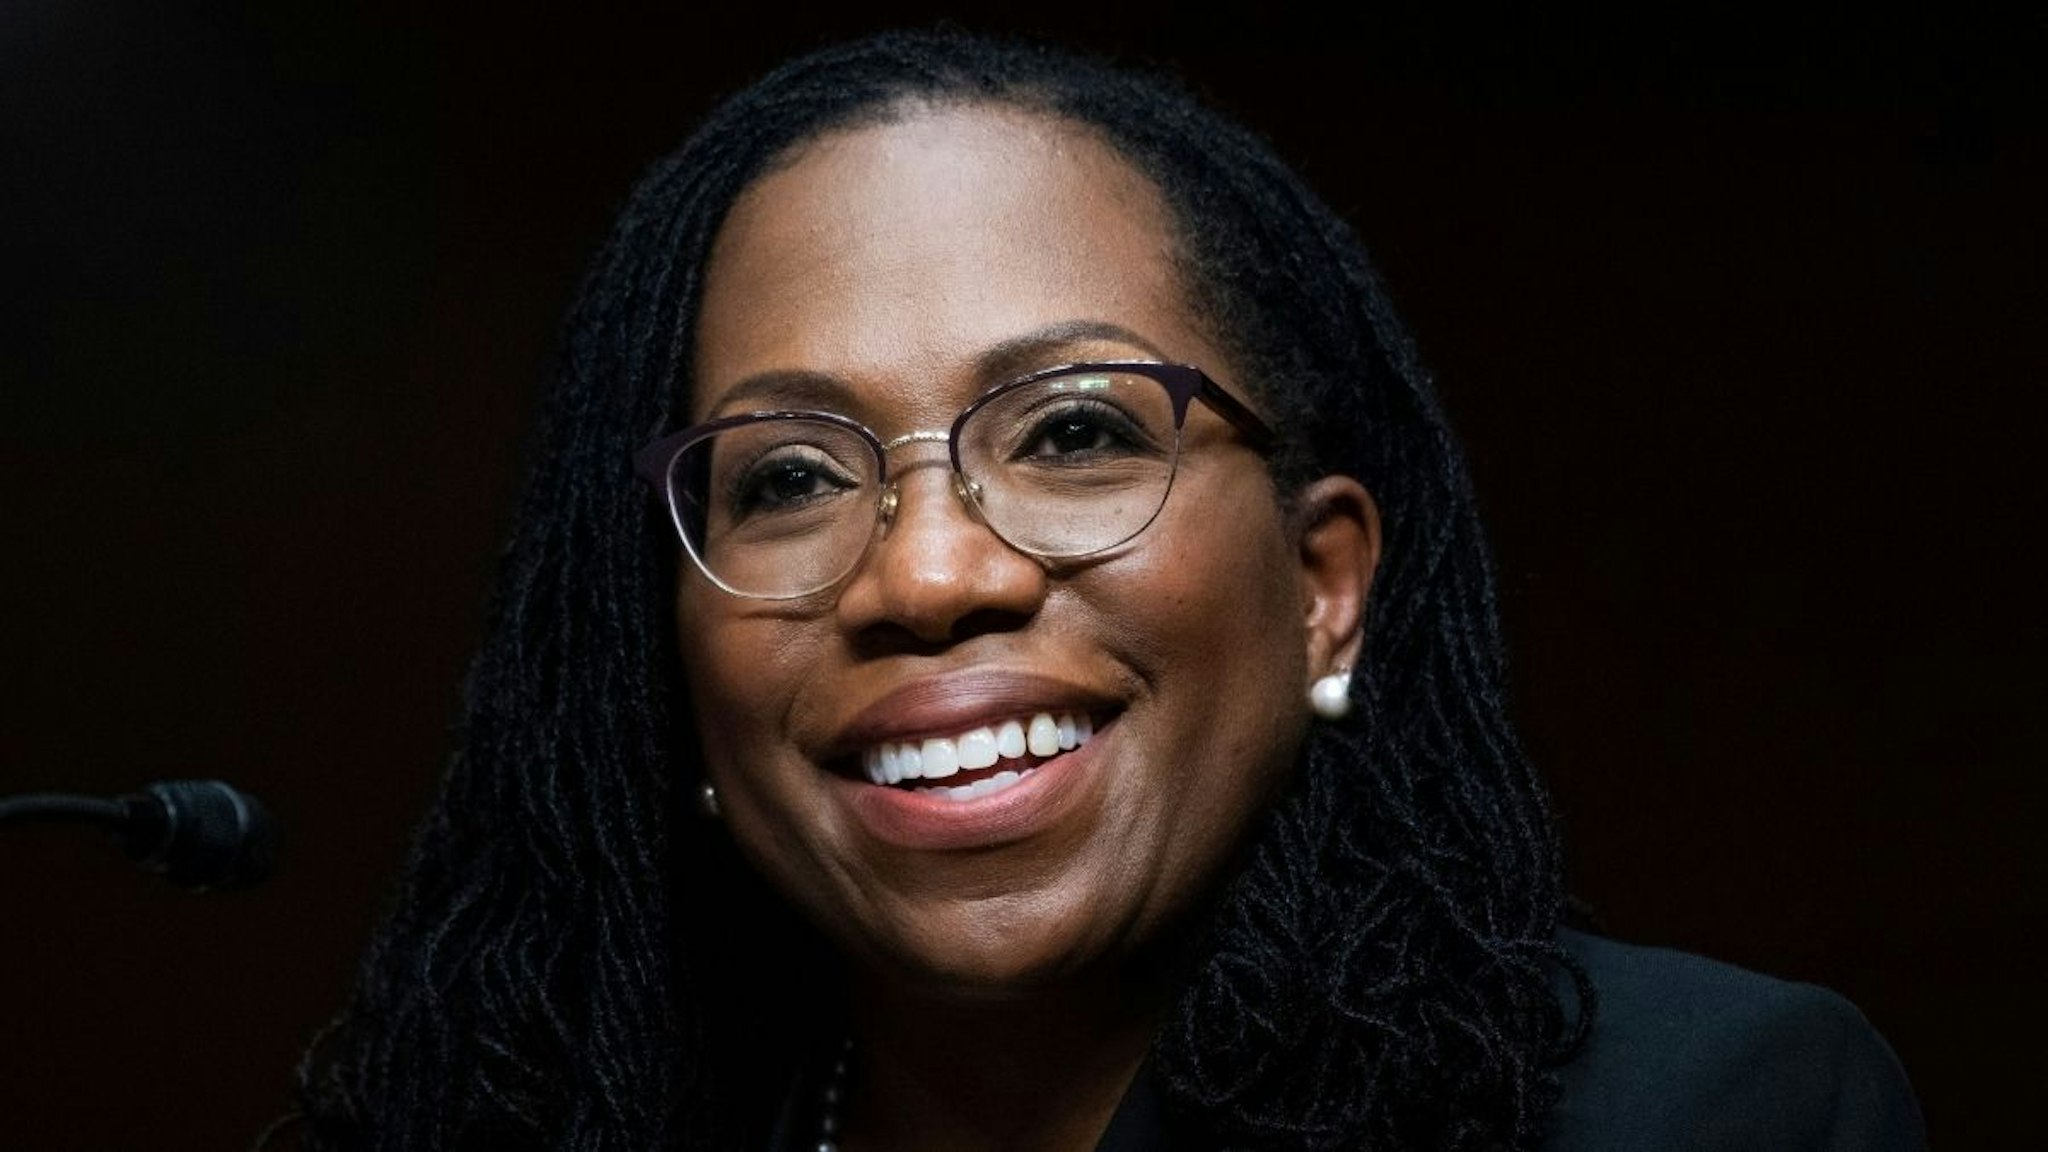 Ketanji Brown Jackson, nominated to be a US Circuit Judge for the District of Columbia Circuit, testifies before a Senate Judiciary Committee hearing on pending judicial nominations on Capitol Hill in Washington,DC on April 28, 2021.